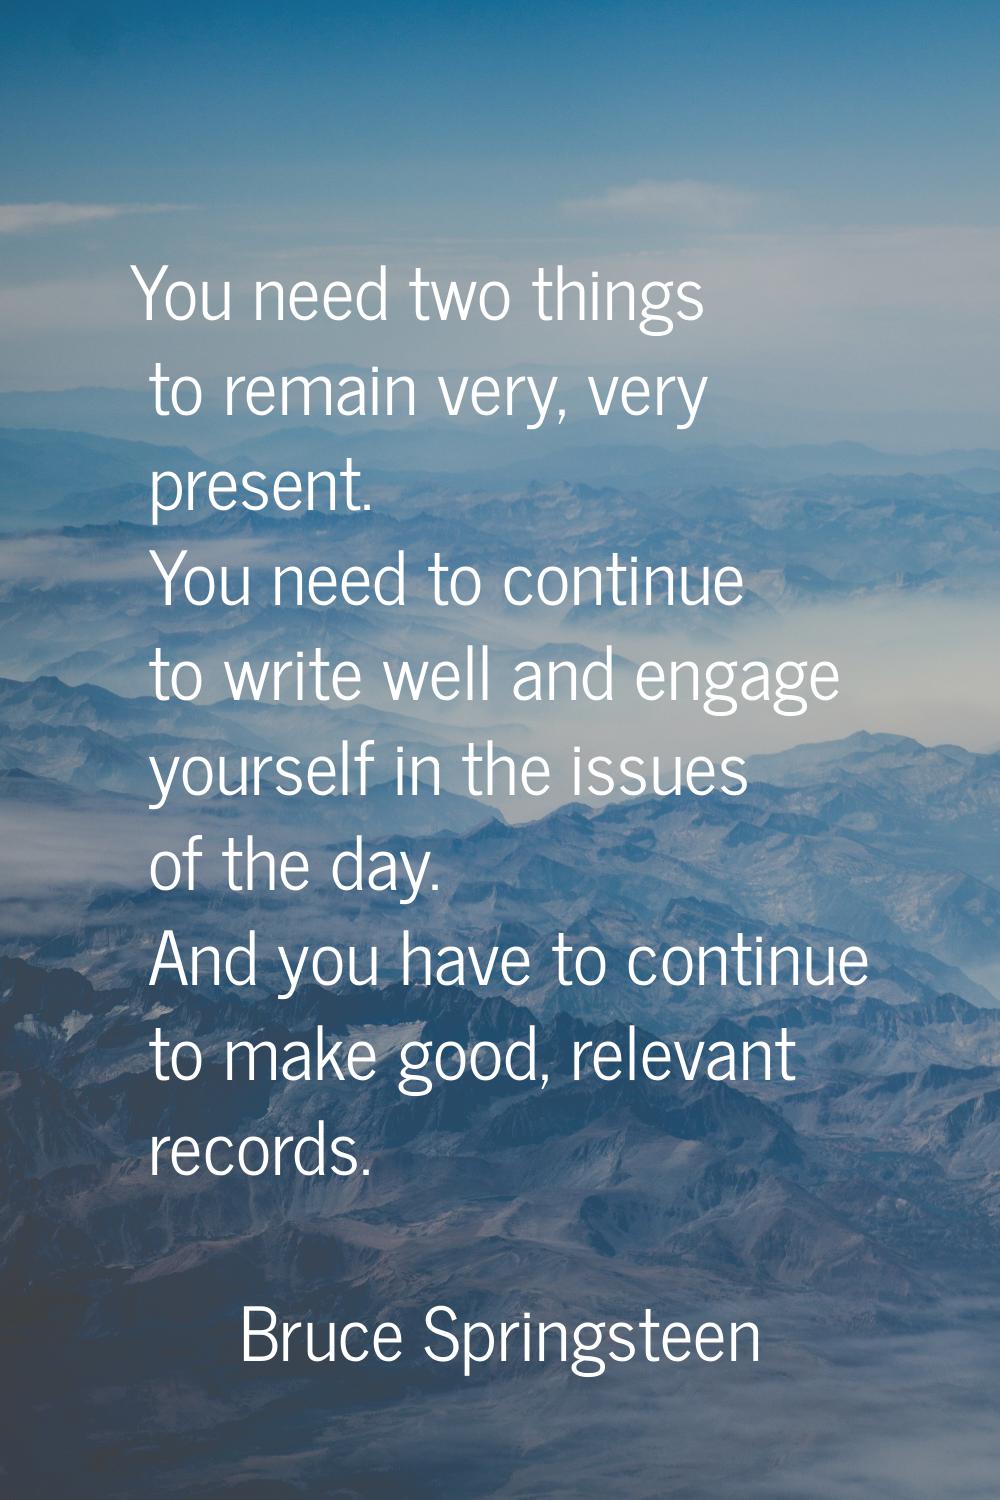 You need two things to remain very, very present. You need to continue to write well and engage you